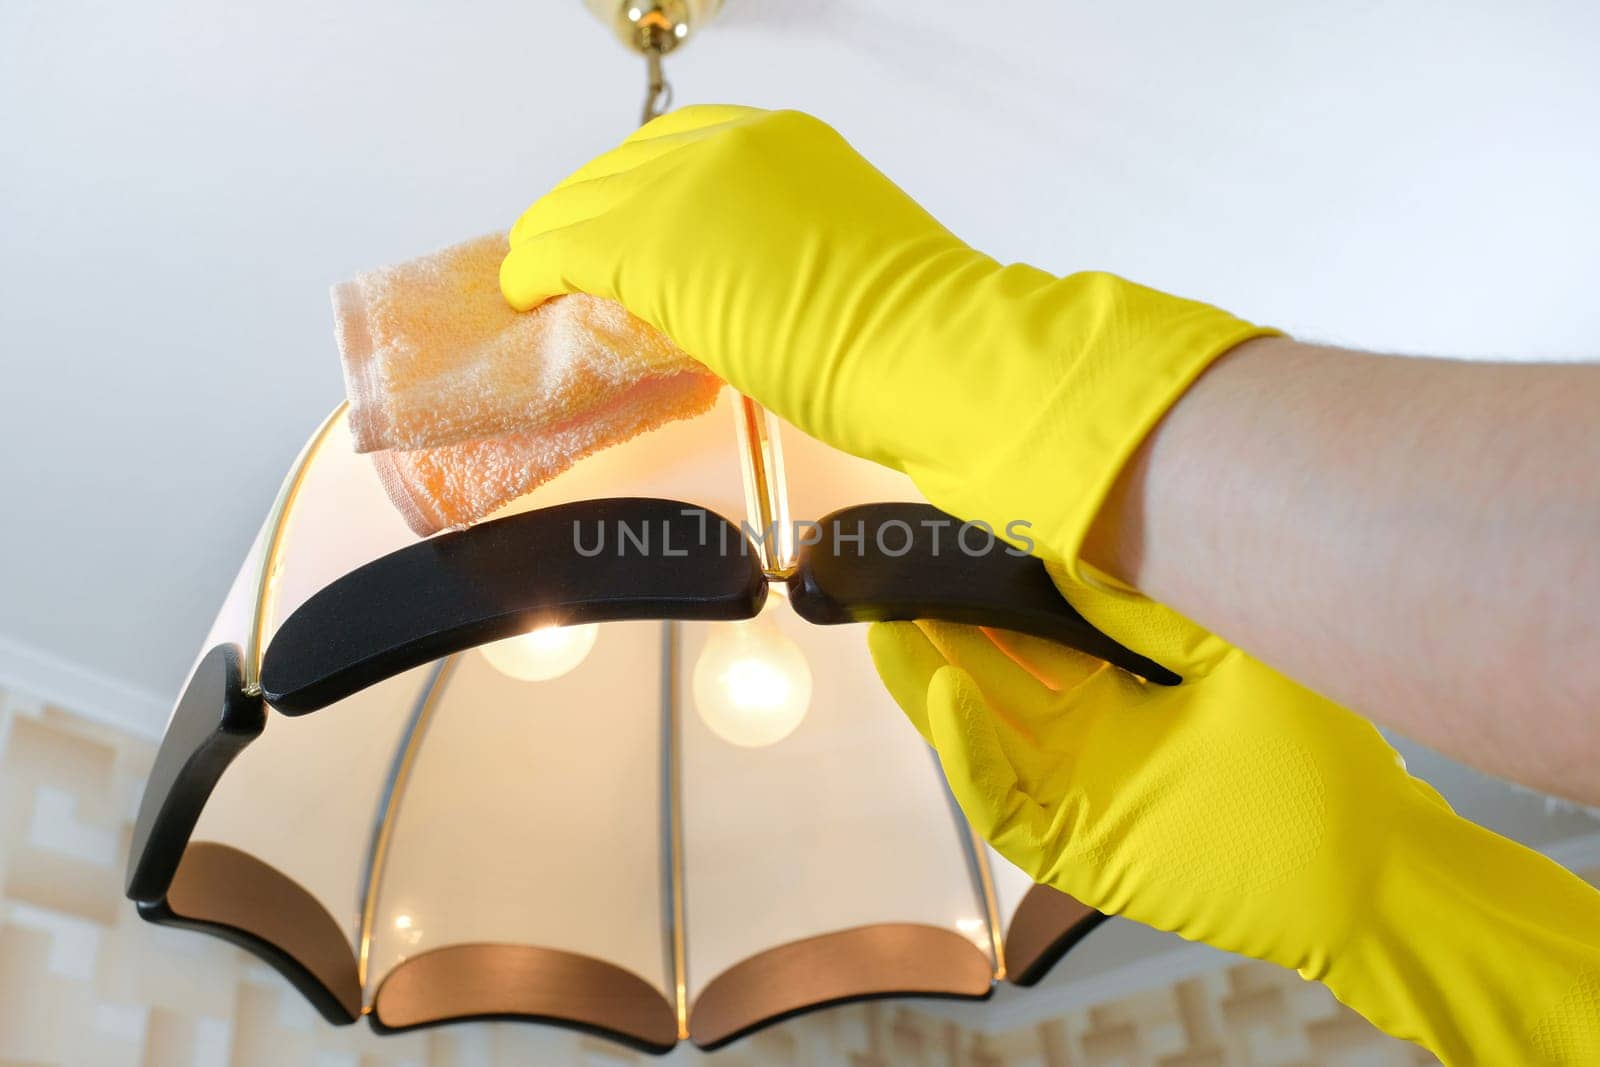 The cleaner wipes the dust from the chandelier. House cleaning by Shablovskyistock